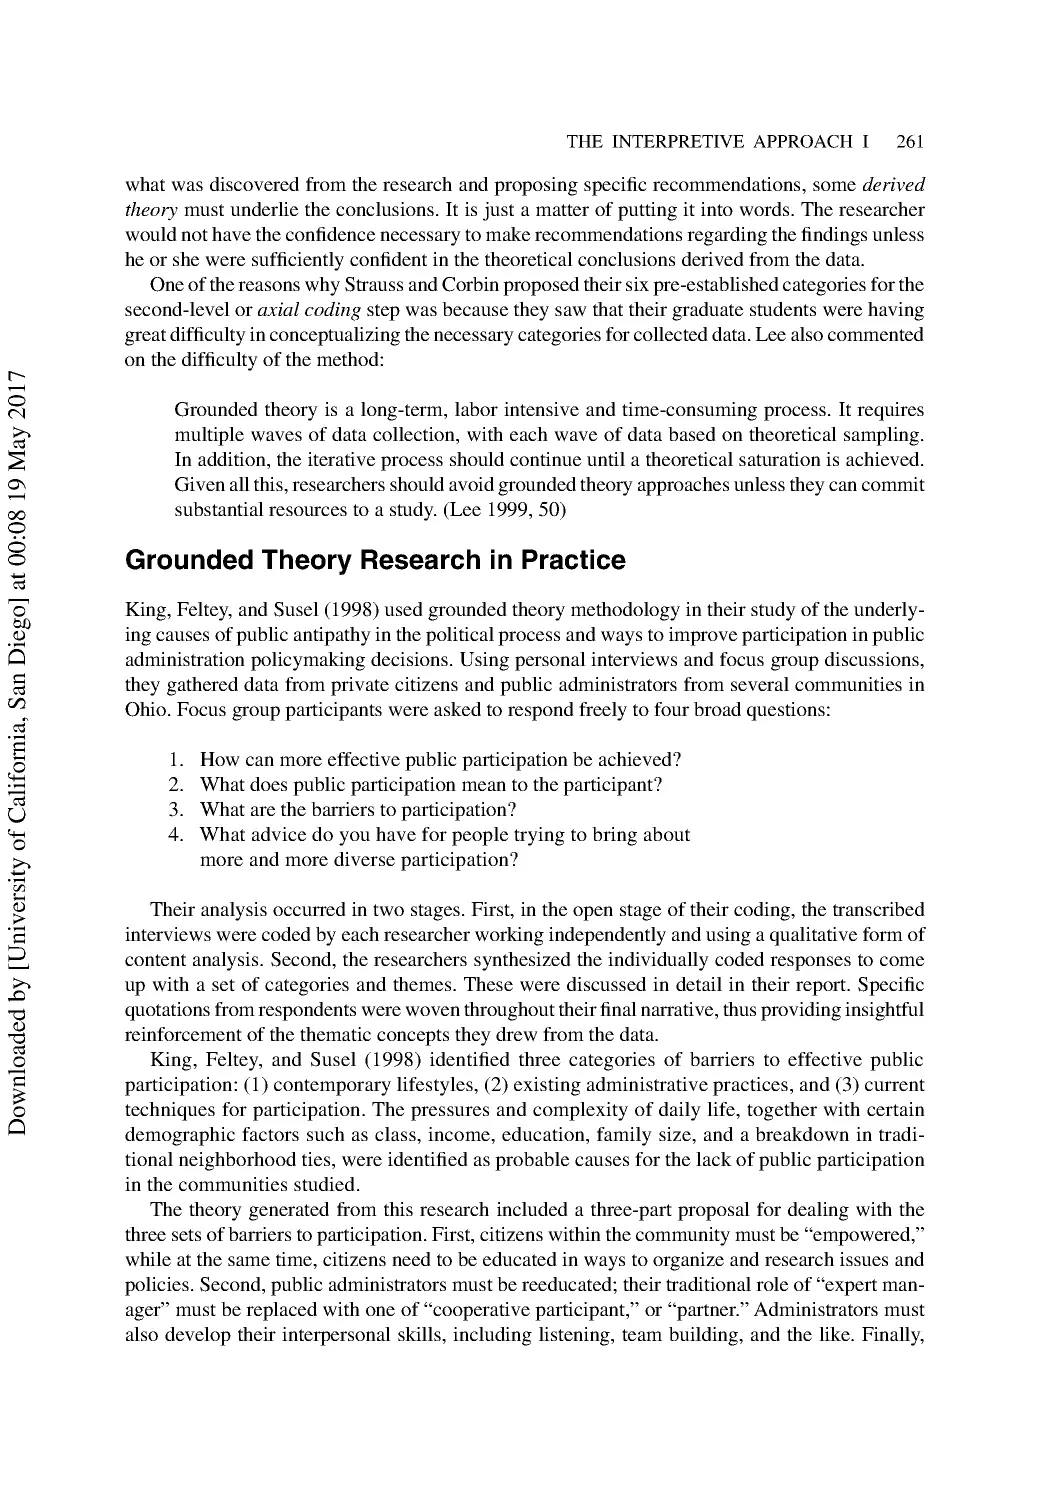 Grounded Theory Research in Practice